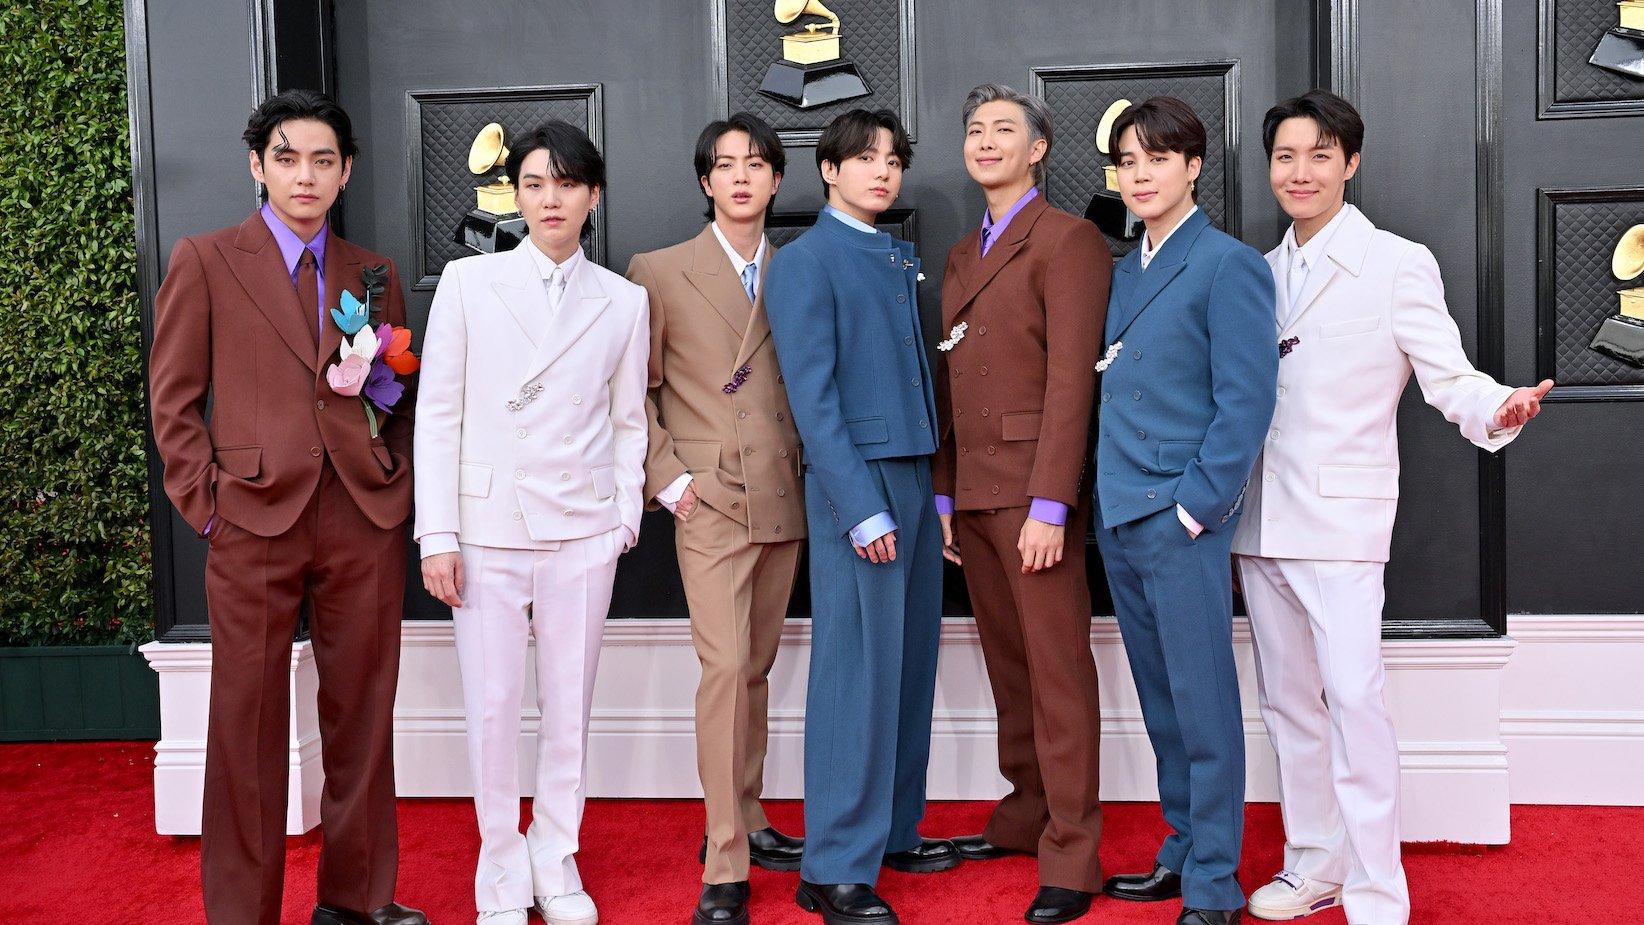 Photo of (L-R) V, Suga, Jin, Jungkook, RM, Jimin and J-Hope of BTS attending the 2022 GRAMMYs, aka the 64th Annual GRAMMY Awards, at MGM Grand Garden Arena on April 03, 2022 in Las Vegas, Nevada